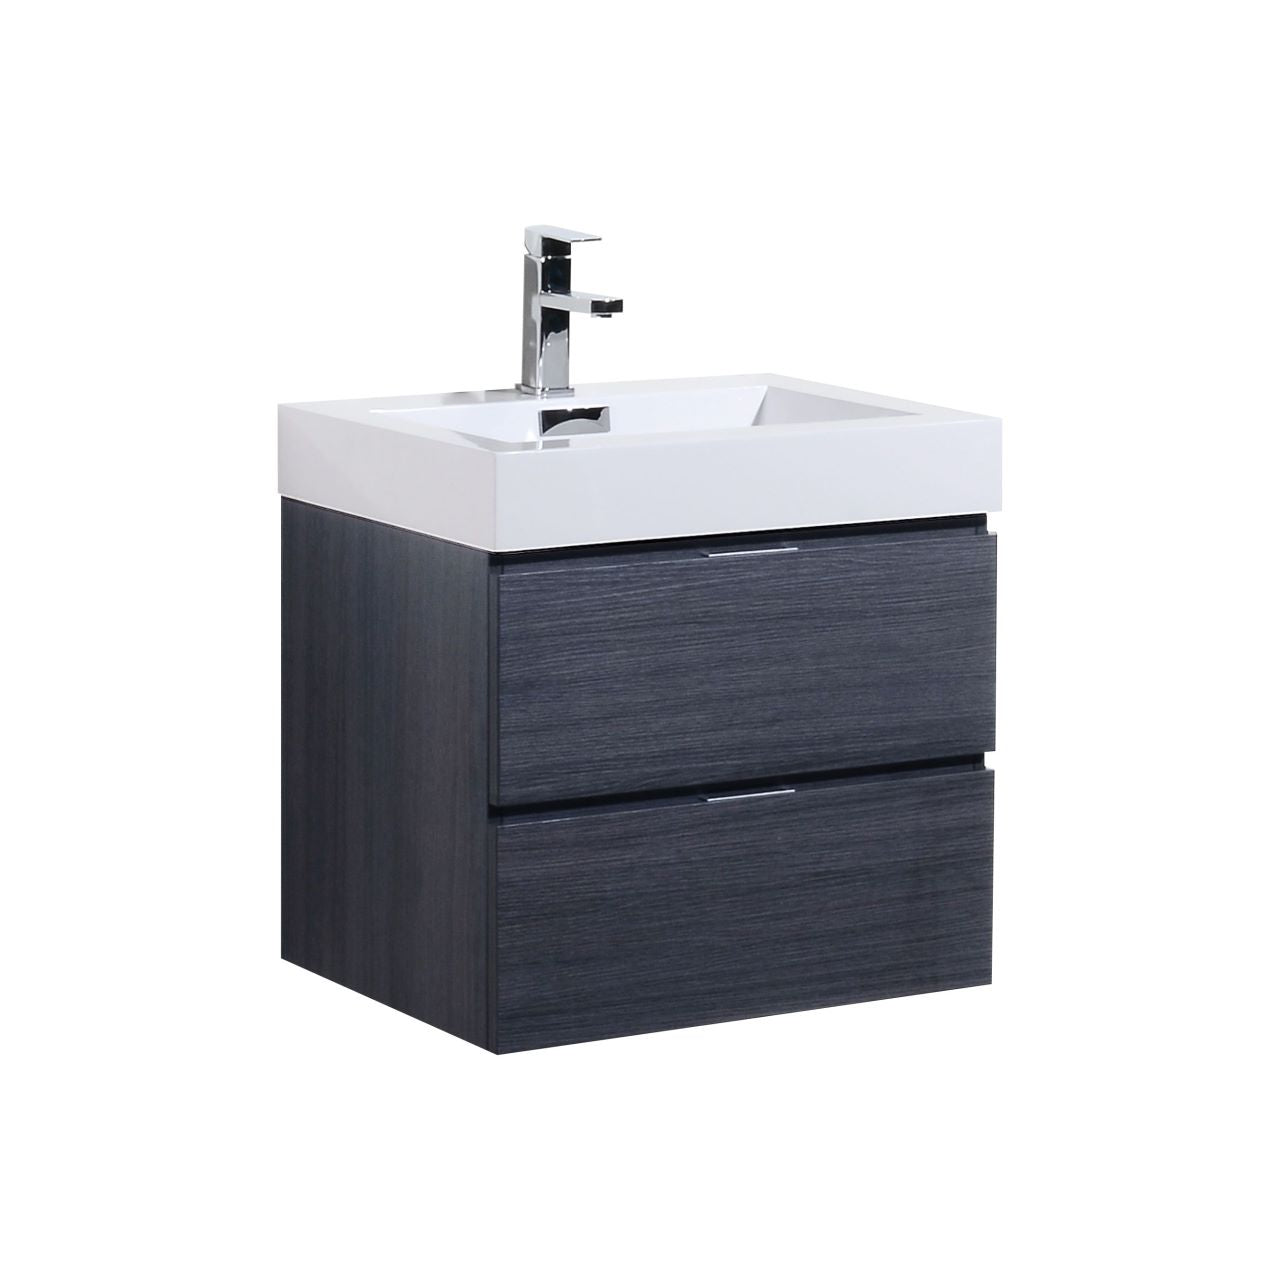 KUBEBATH Bliss BSL24-GO 24" Single Wall Mount Bathroom Vanity in Gray Oak with White Acrylic Composite, Integrated Sink, Angled View